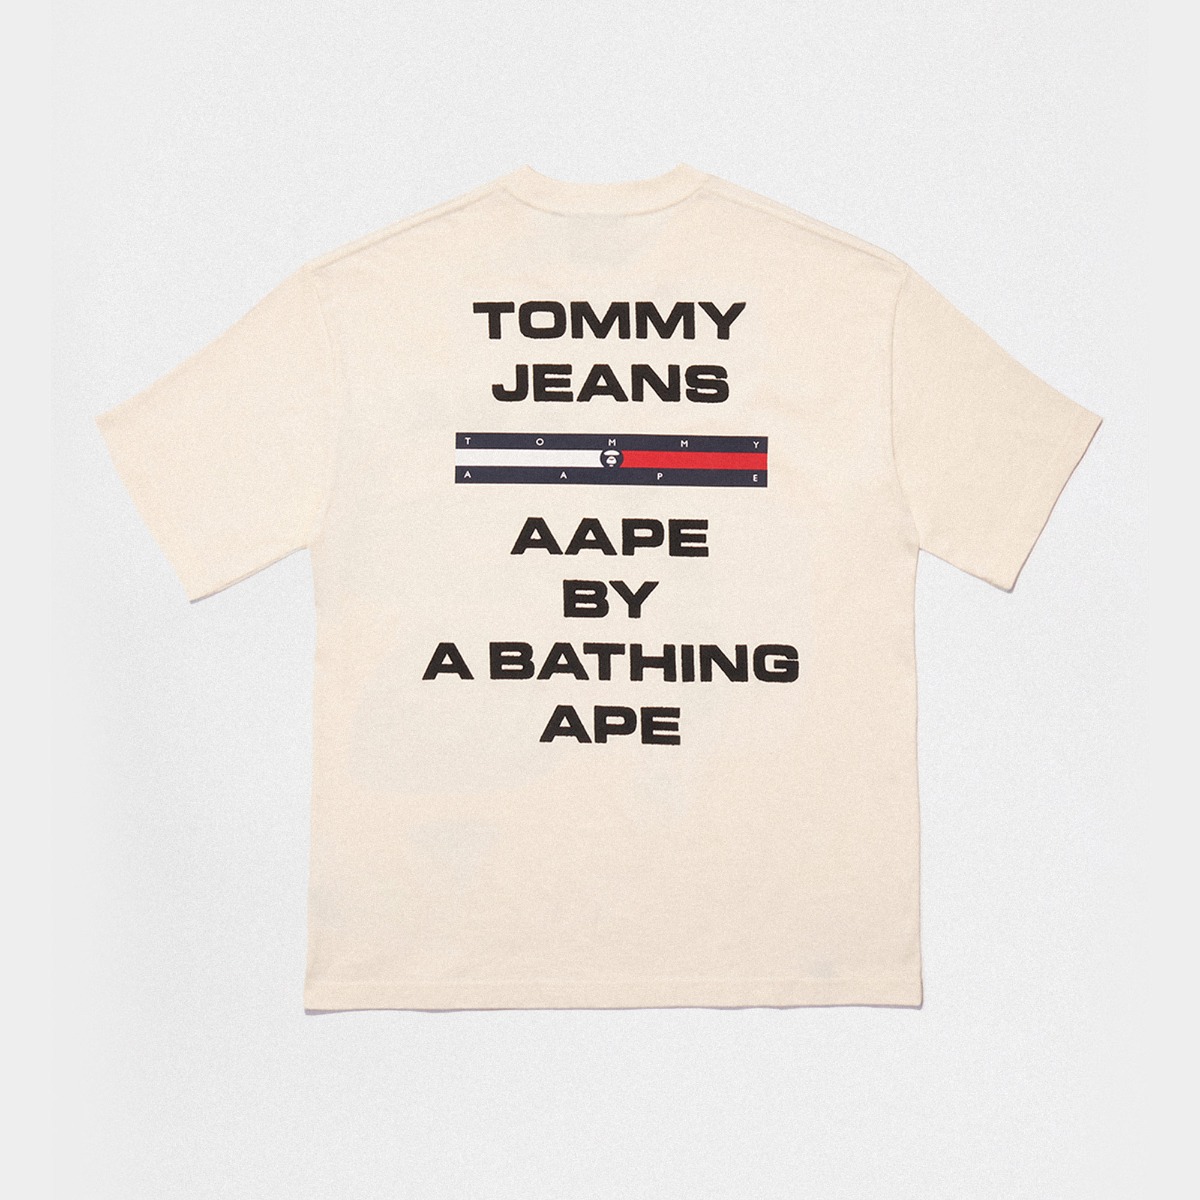 <div style="text-align: left">TOMMY JEANS x AAPE</div>